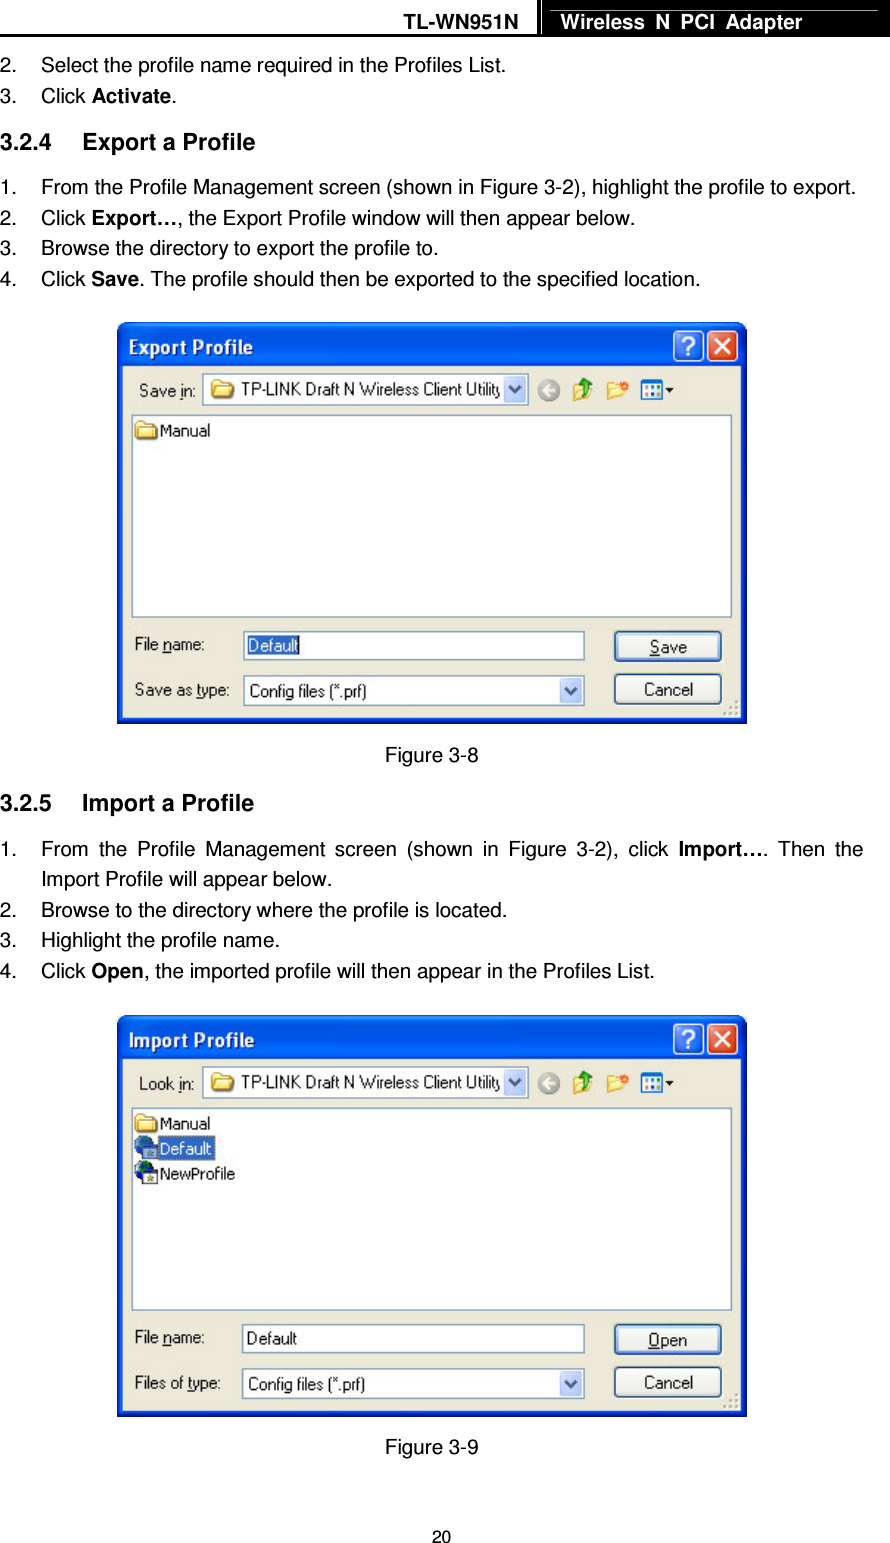 TL-WN951N  Wireless  N  PCI  Adapter   202.  Select the profile name required in the Profiles List. 3.  Click Activate. 3.2.4  Export a Profile 1.  From the Profile Management screen (shown in Figure 3-2), highlight the profile to export. 2.  Click Export…, the Export Profile window will then appear below. 3.  Browse the directory to export the profile to. 4.  Click Save. The profile should then be exported to the specified location.  Figure 3-8 3.2.5  Import a Profile 1.  From  the  Profile  Management  screen  (shown  in  Figure  3-2),  click  Import….  Then  the Import Profile will appear below. 2.  Browse to the directory where the profile is located. 3.  Highlight the profile name. 4.  Click Open, the imported profile will then appear in the Profiles List.  Figure 3-9 